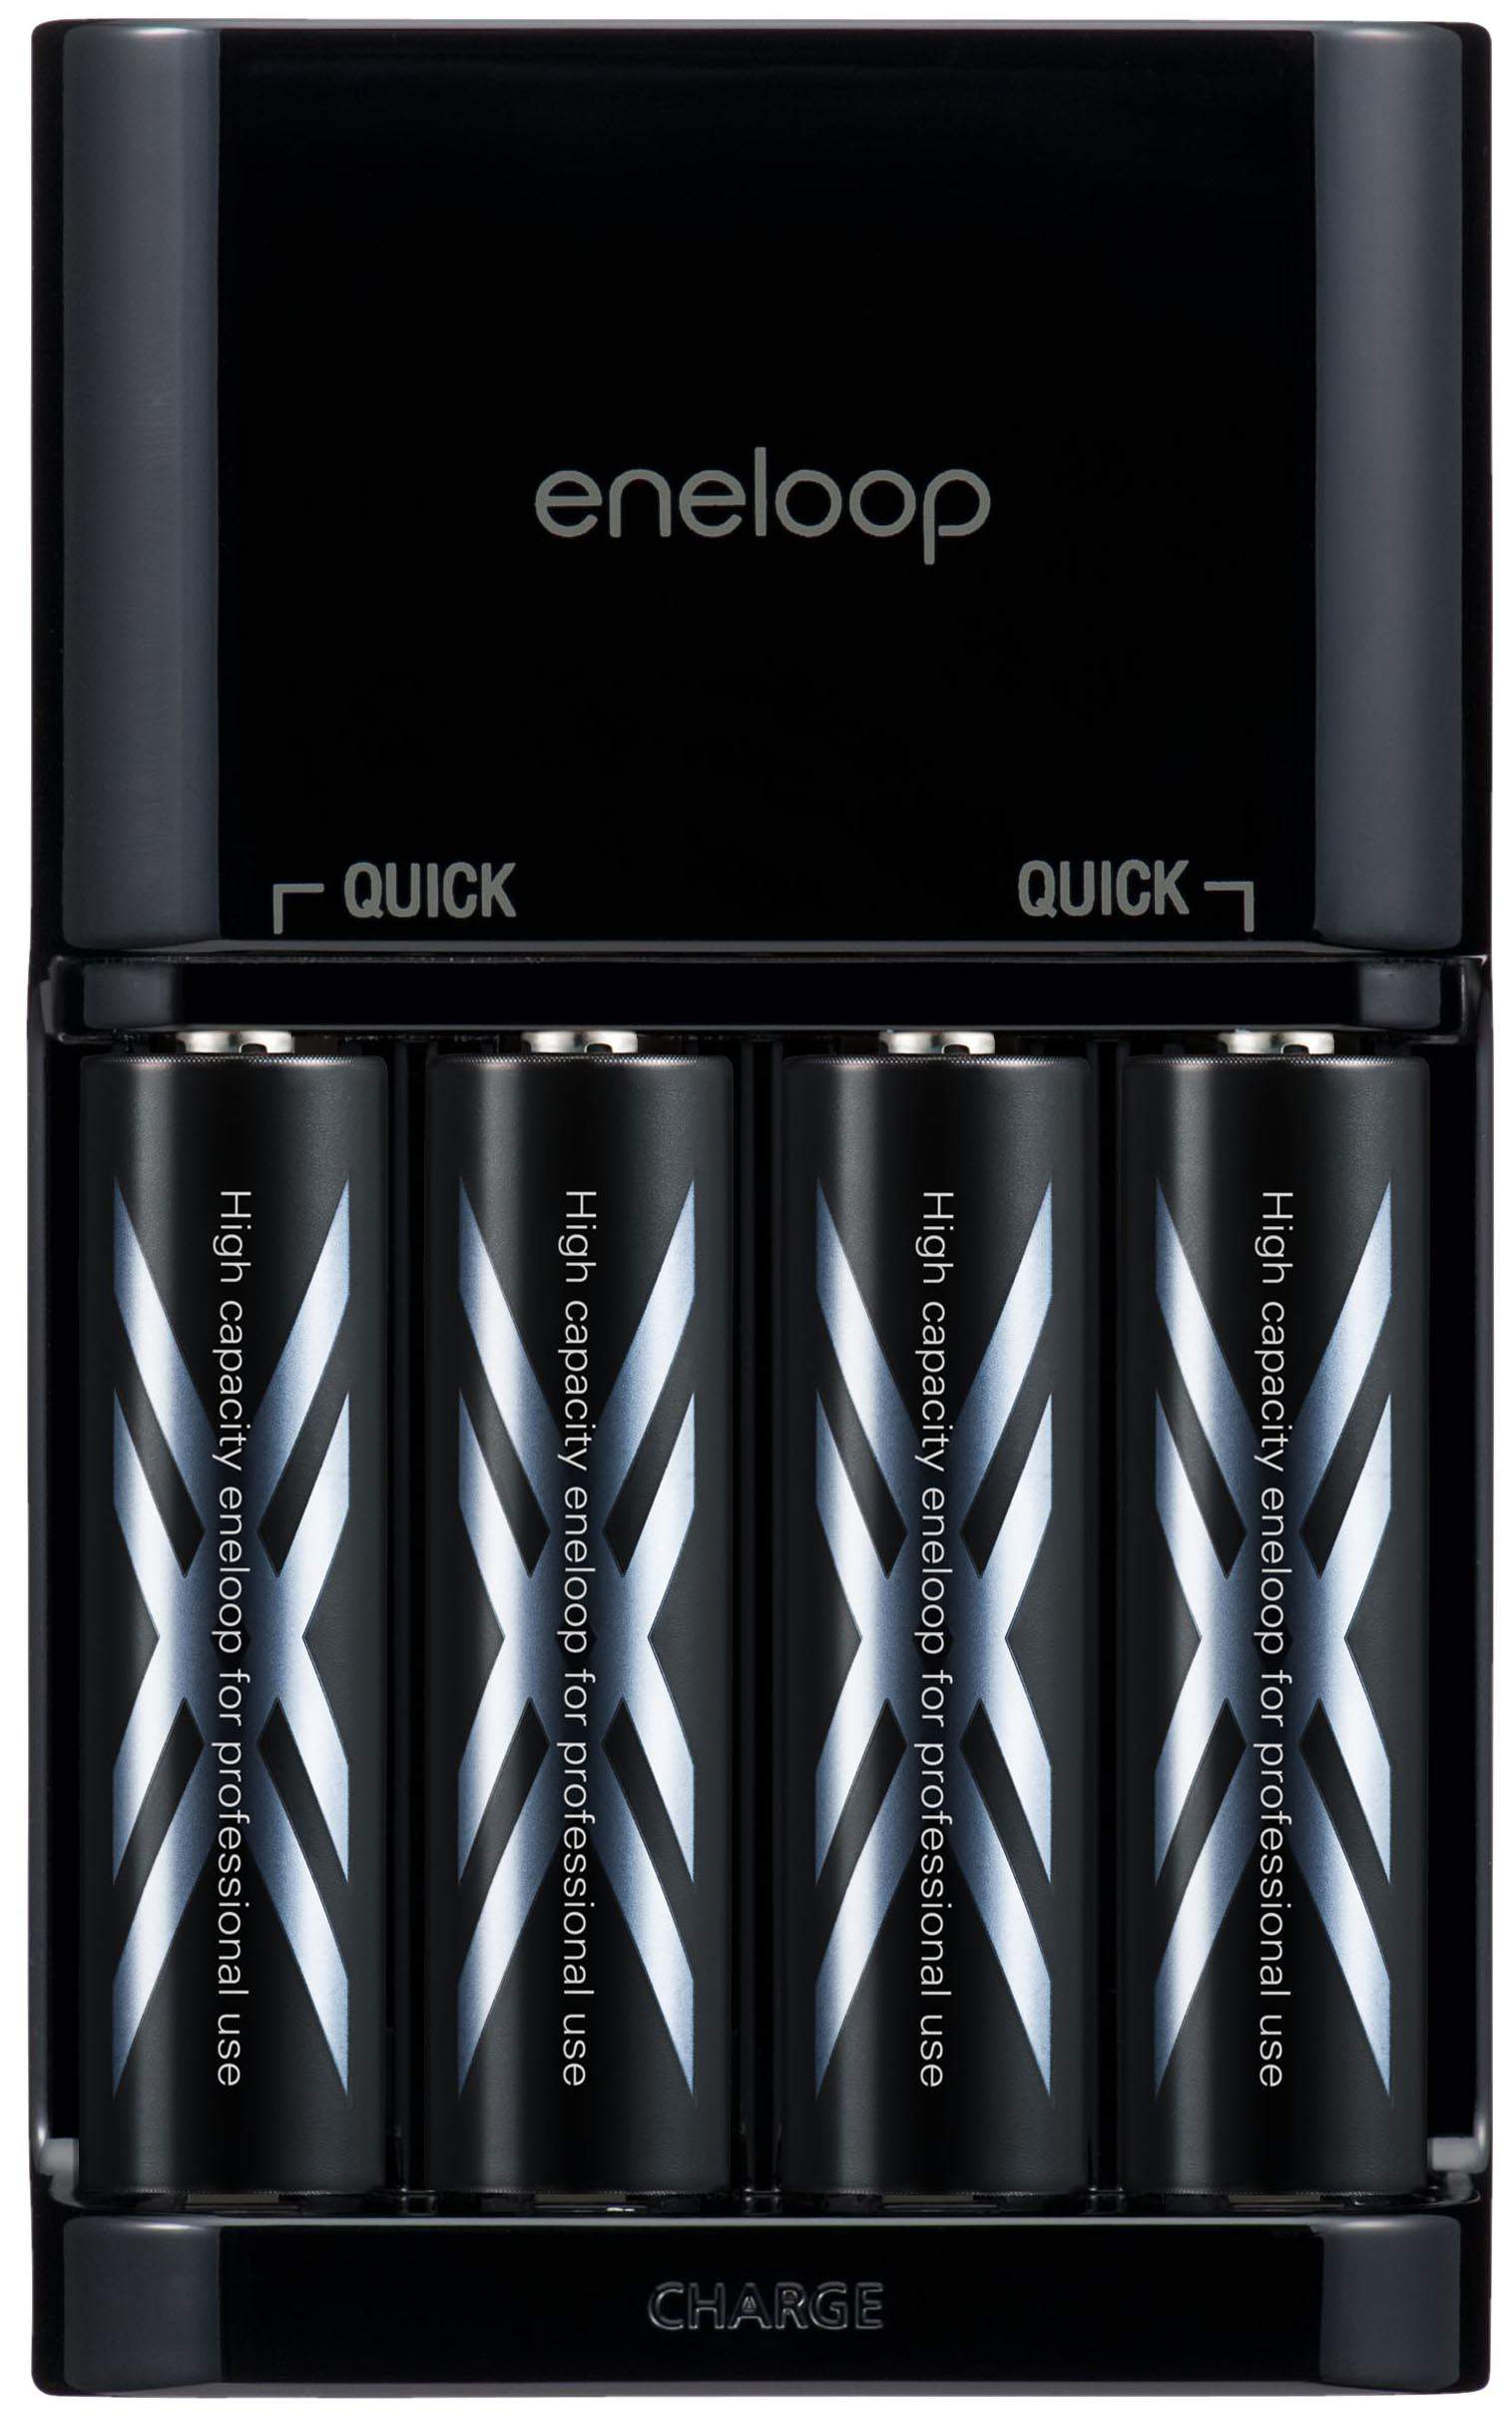 Eneloop charger list 2019 (the best + worst) Sanyo and Panasonic